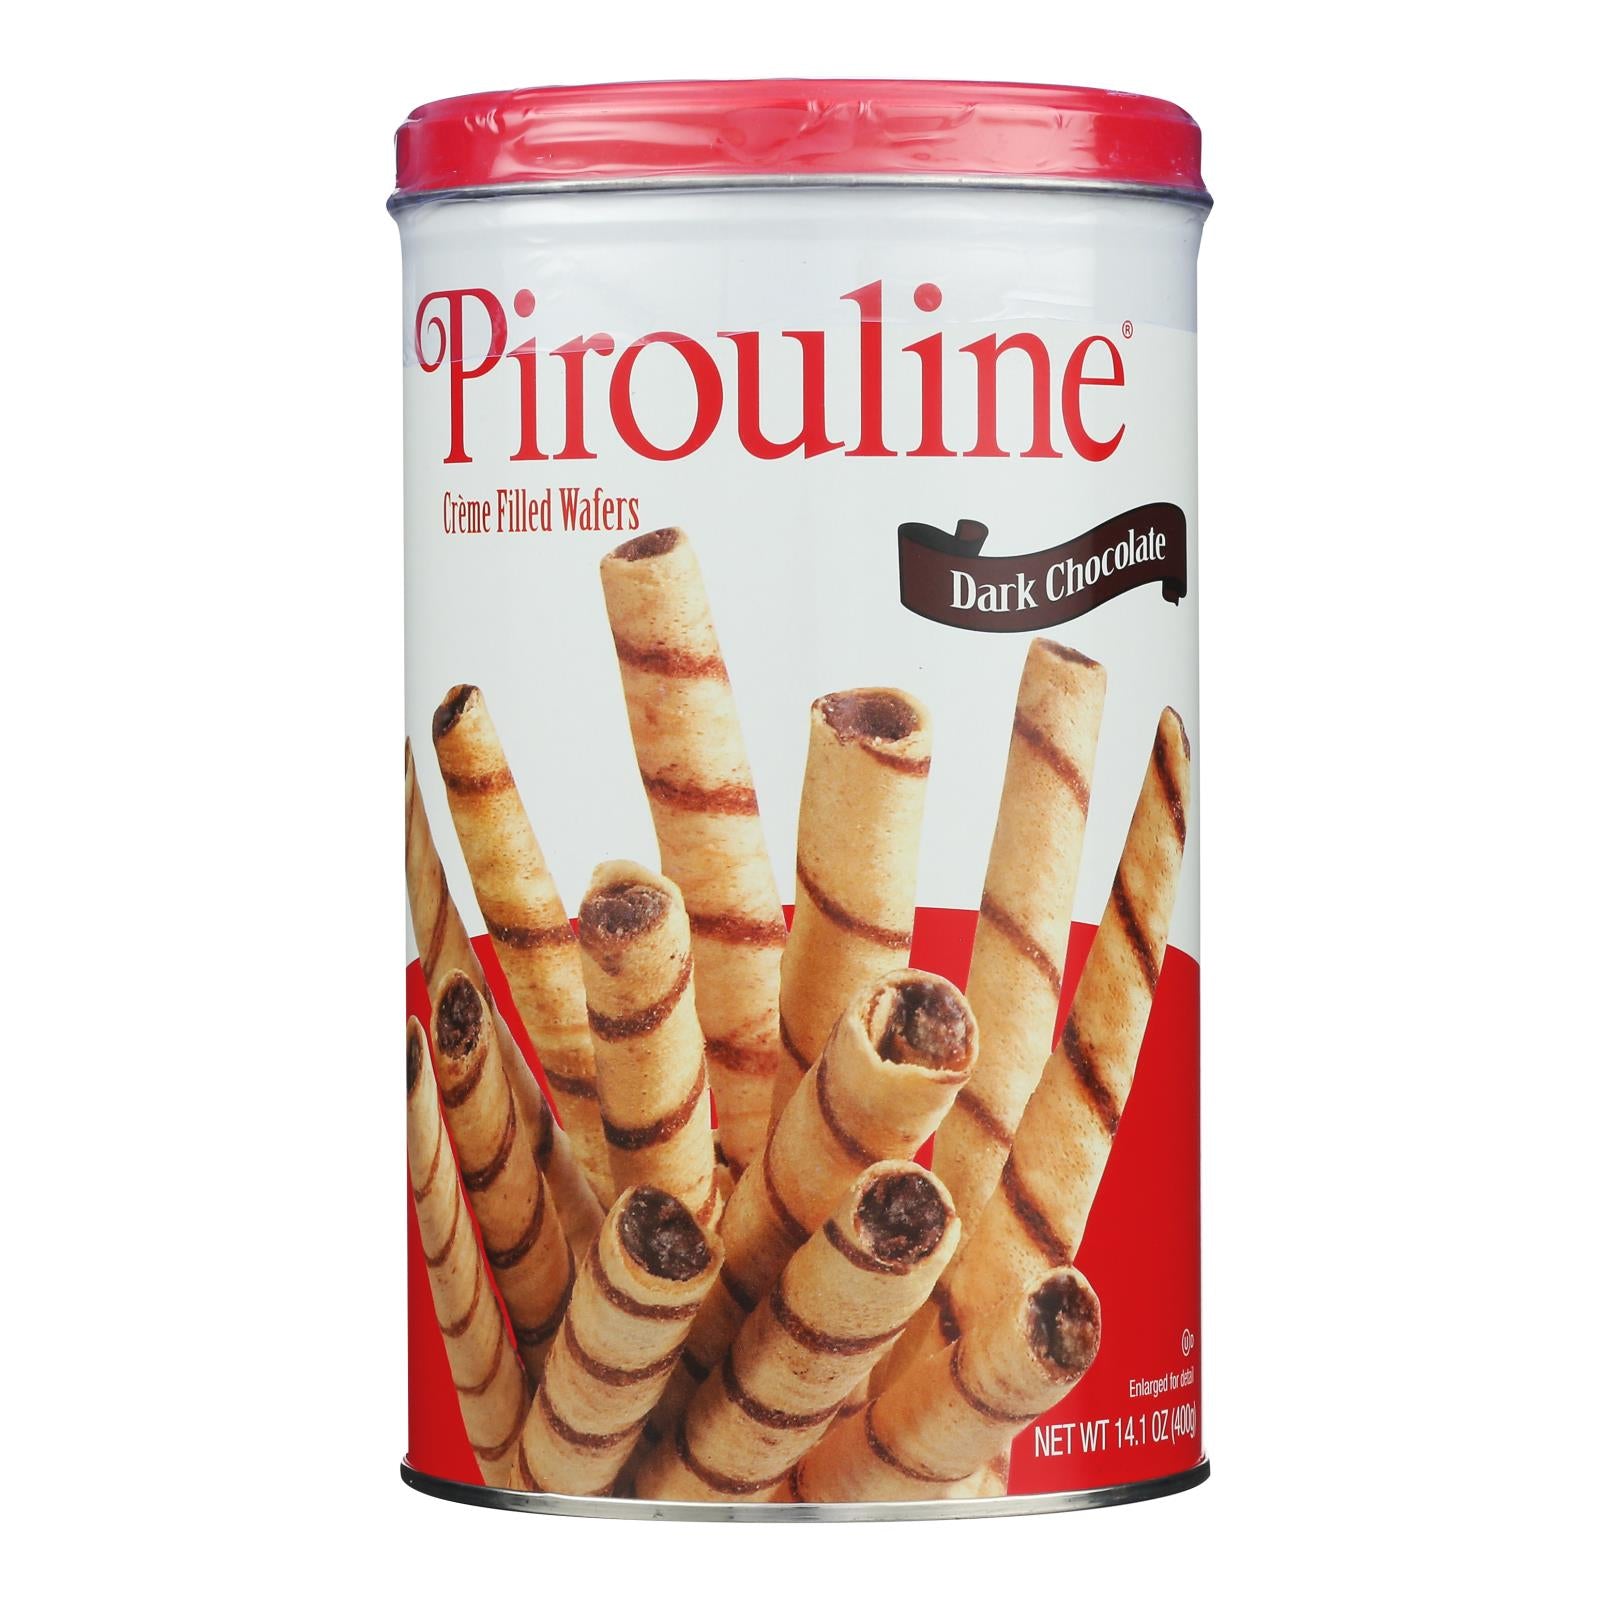 De Beukelaer - Cookies - Pirouline Creme Filled Rolled Wafers - Case Of 6 - 14.1 Oz.